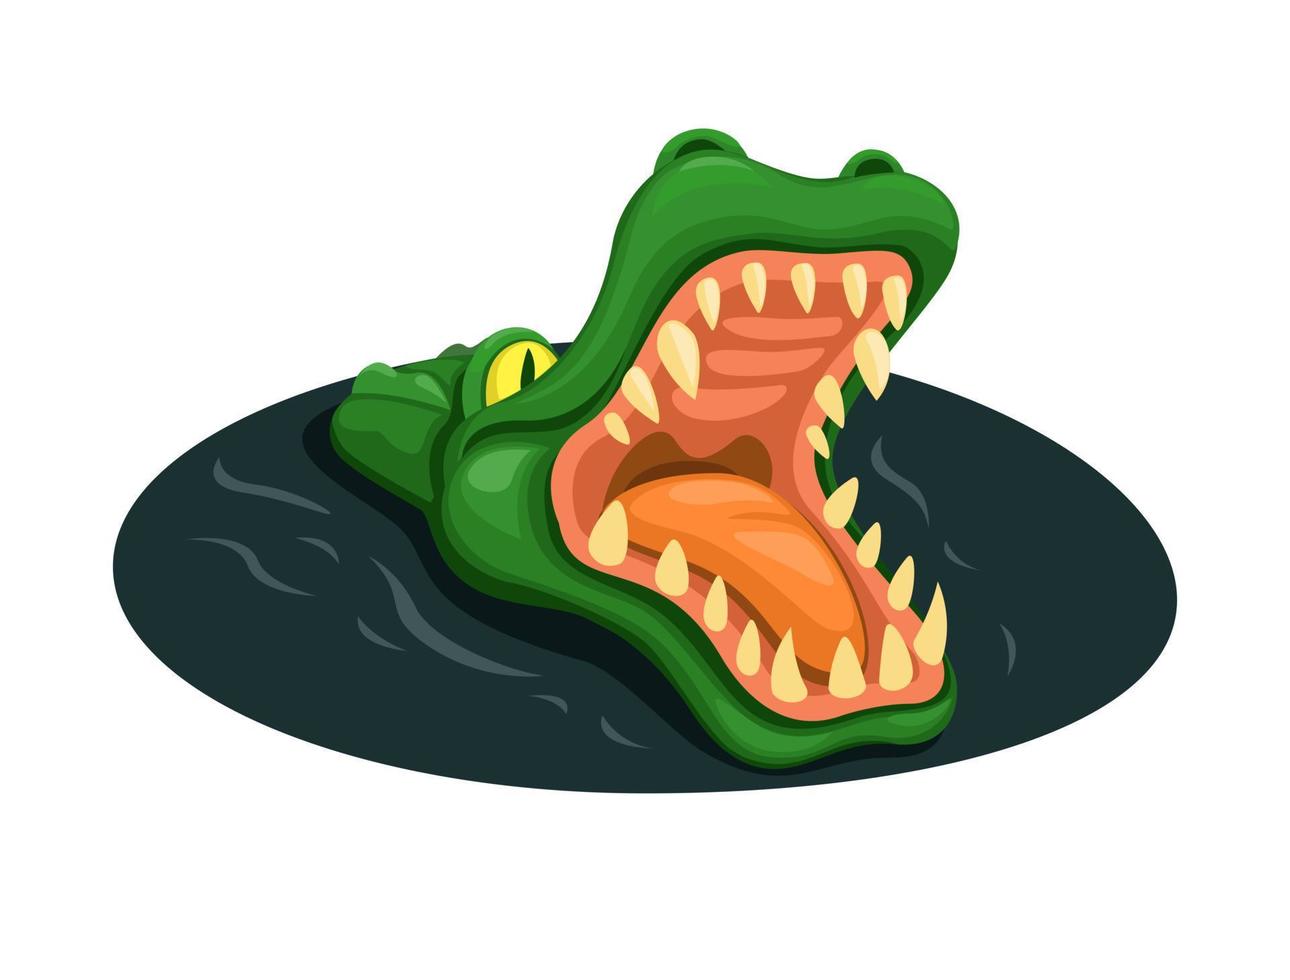 Crocodile open mouth while swimming on river cartoon illustration vector